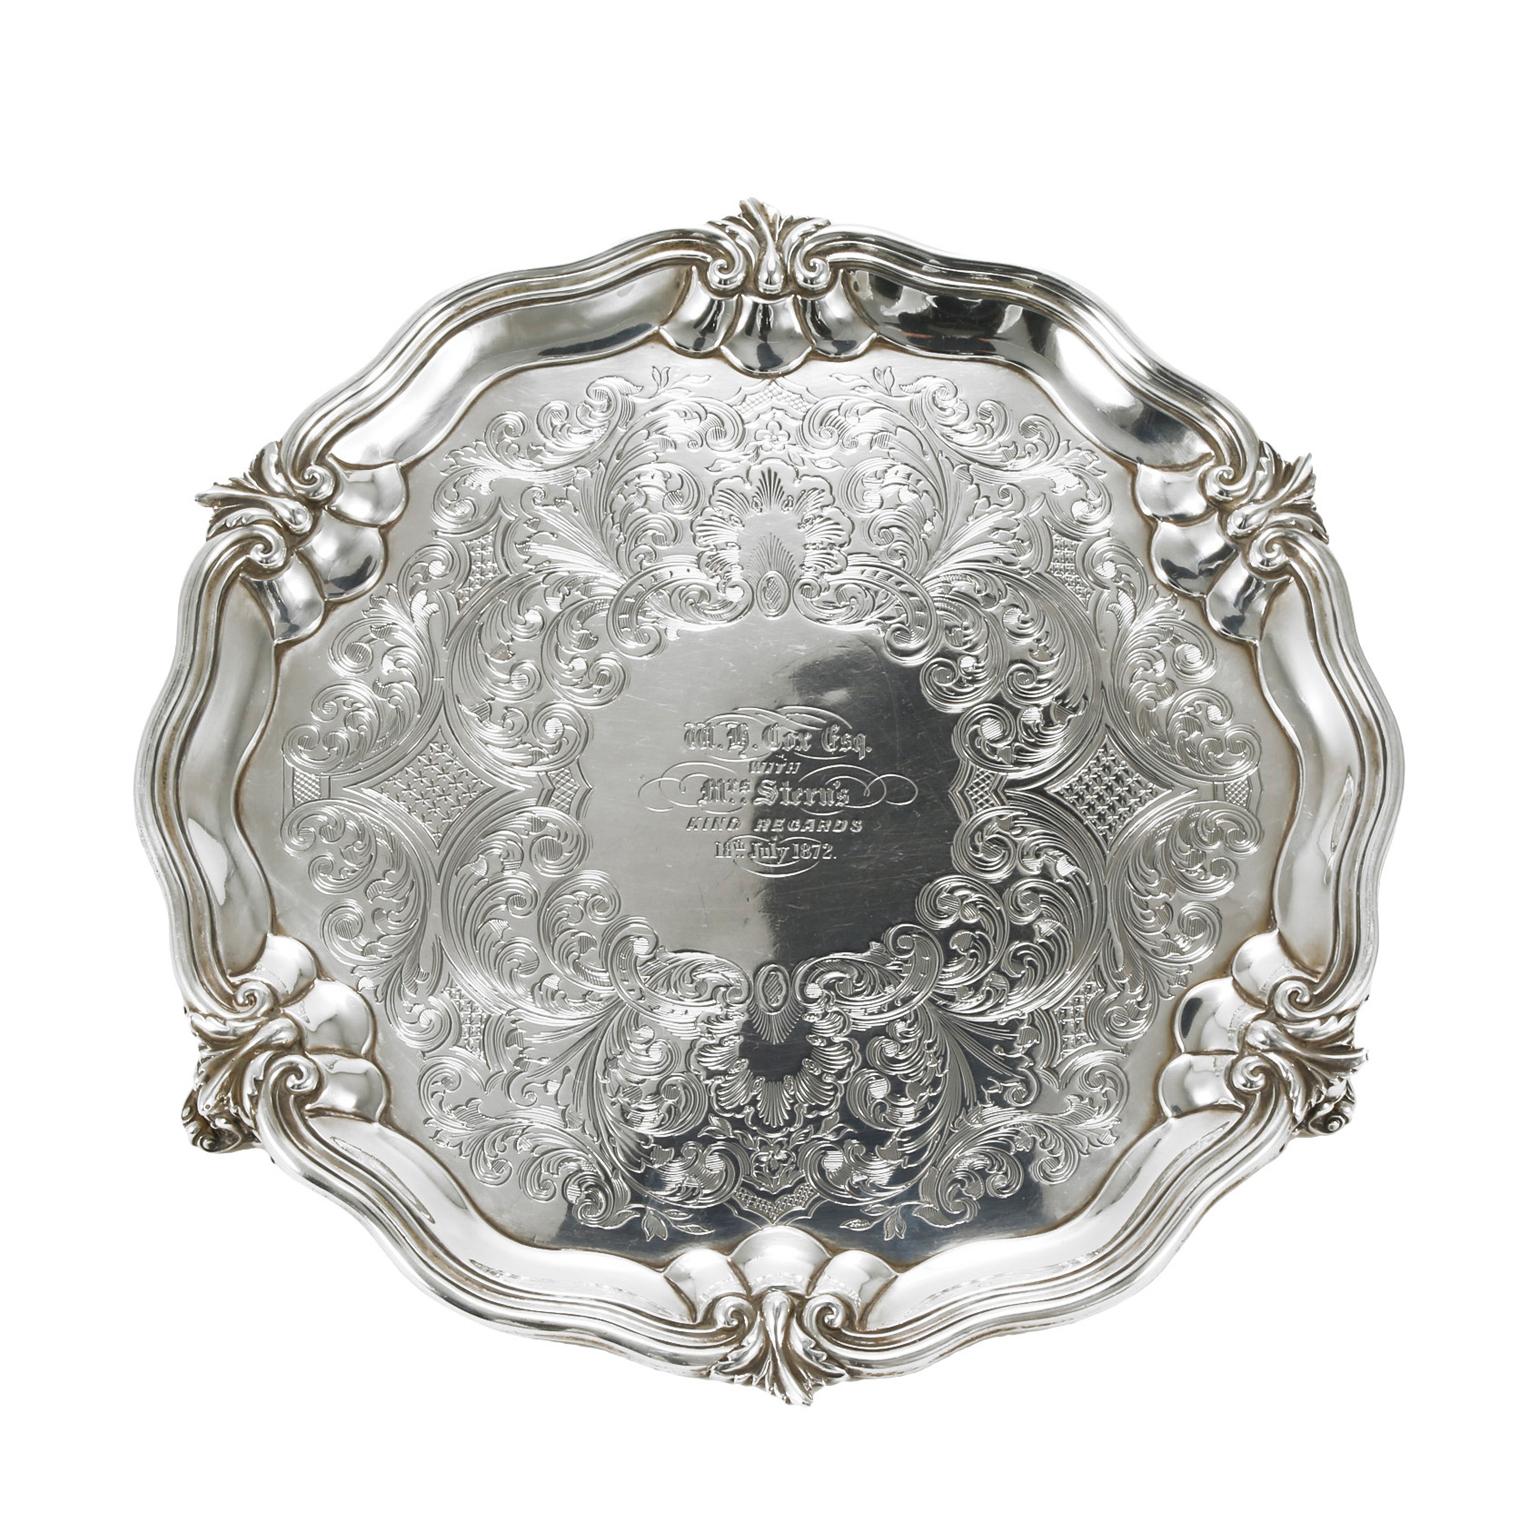 Early Victorian Sterling Silver Tray Charles Reily & George Storer, London 1841 For Sale